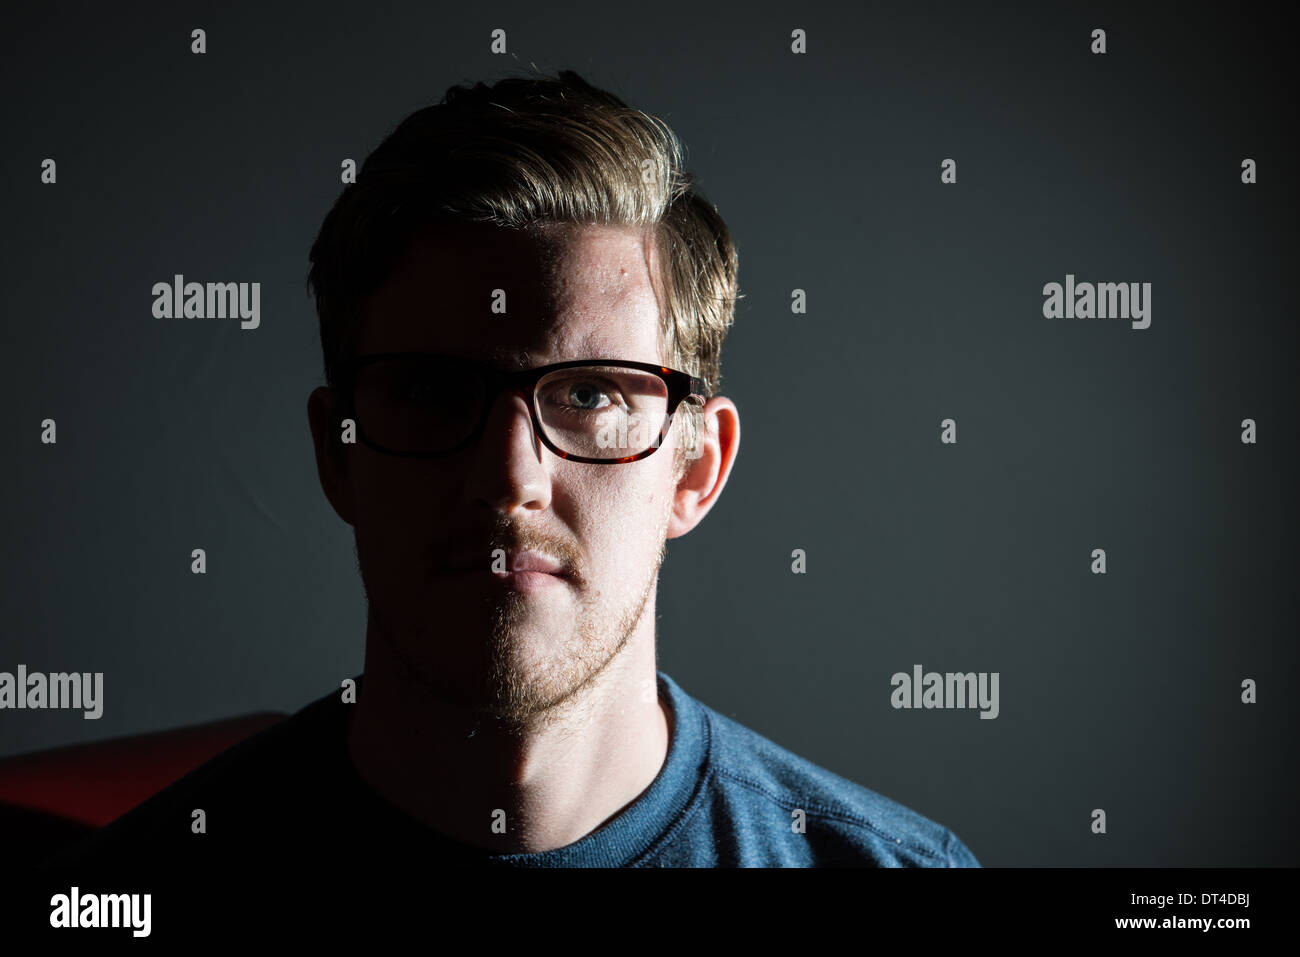 A young man wearing glasses and photographed on black with one side of his face in shadow looks at the camera Stock Photo